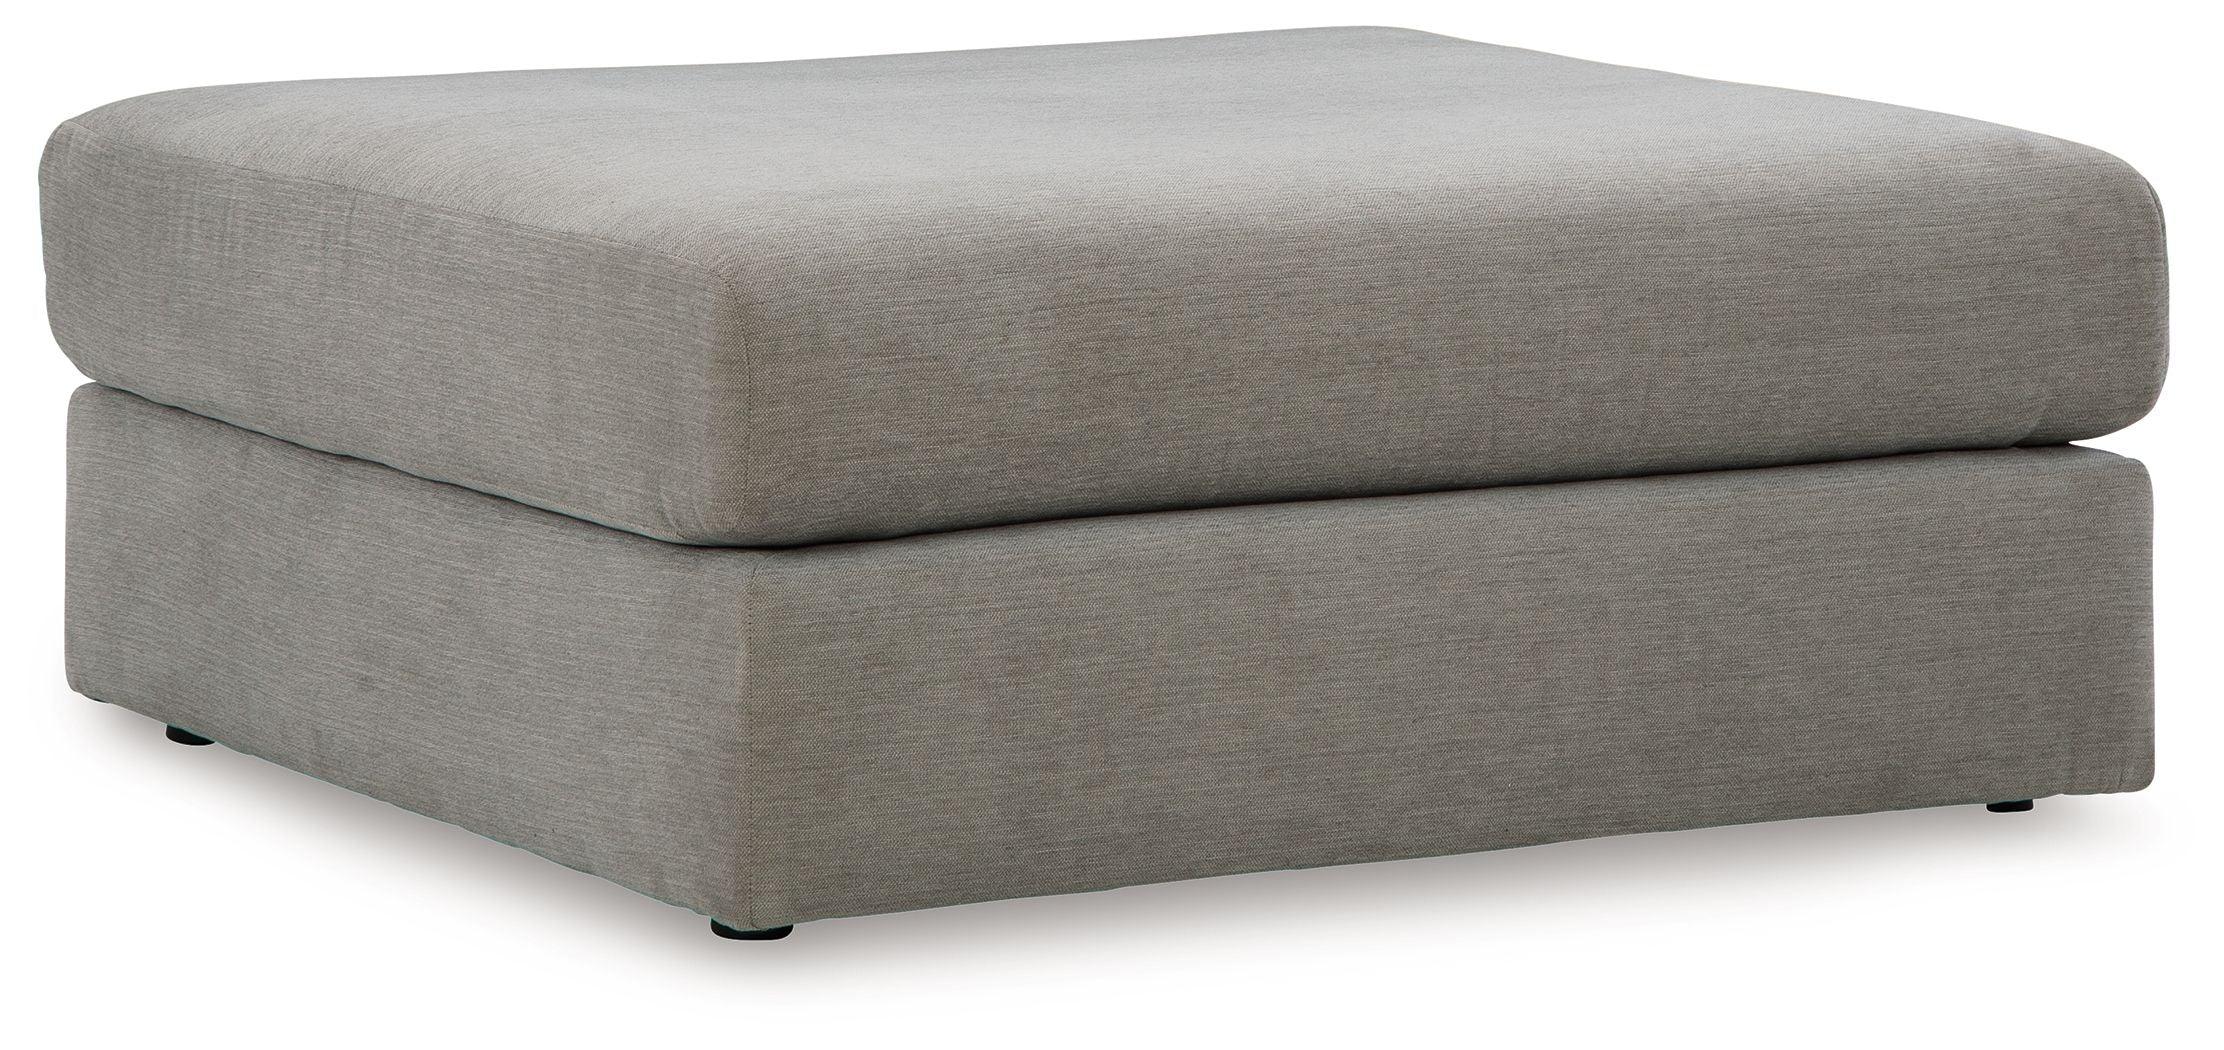 Signature Design by Ashley® - Avaliyah - Ash - Oversized Accent Ottoman - 5th Avenue Furniture